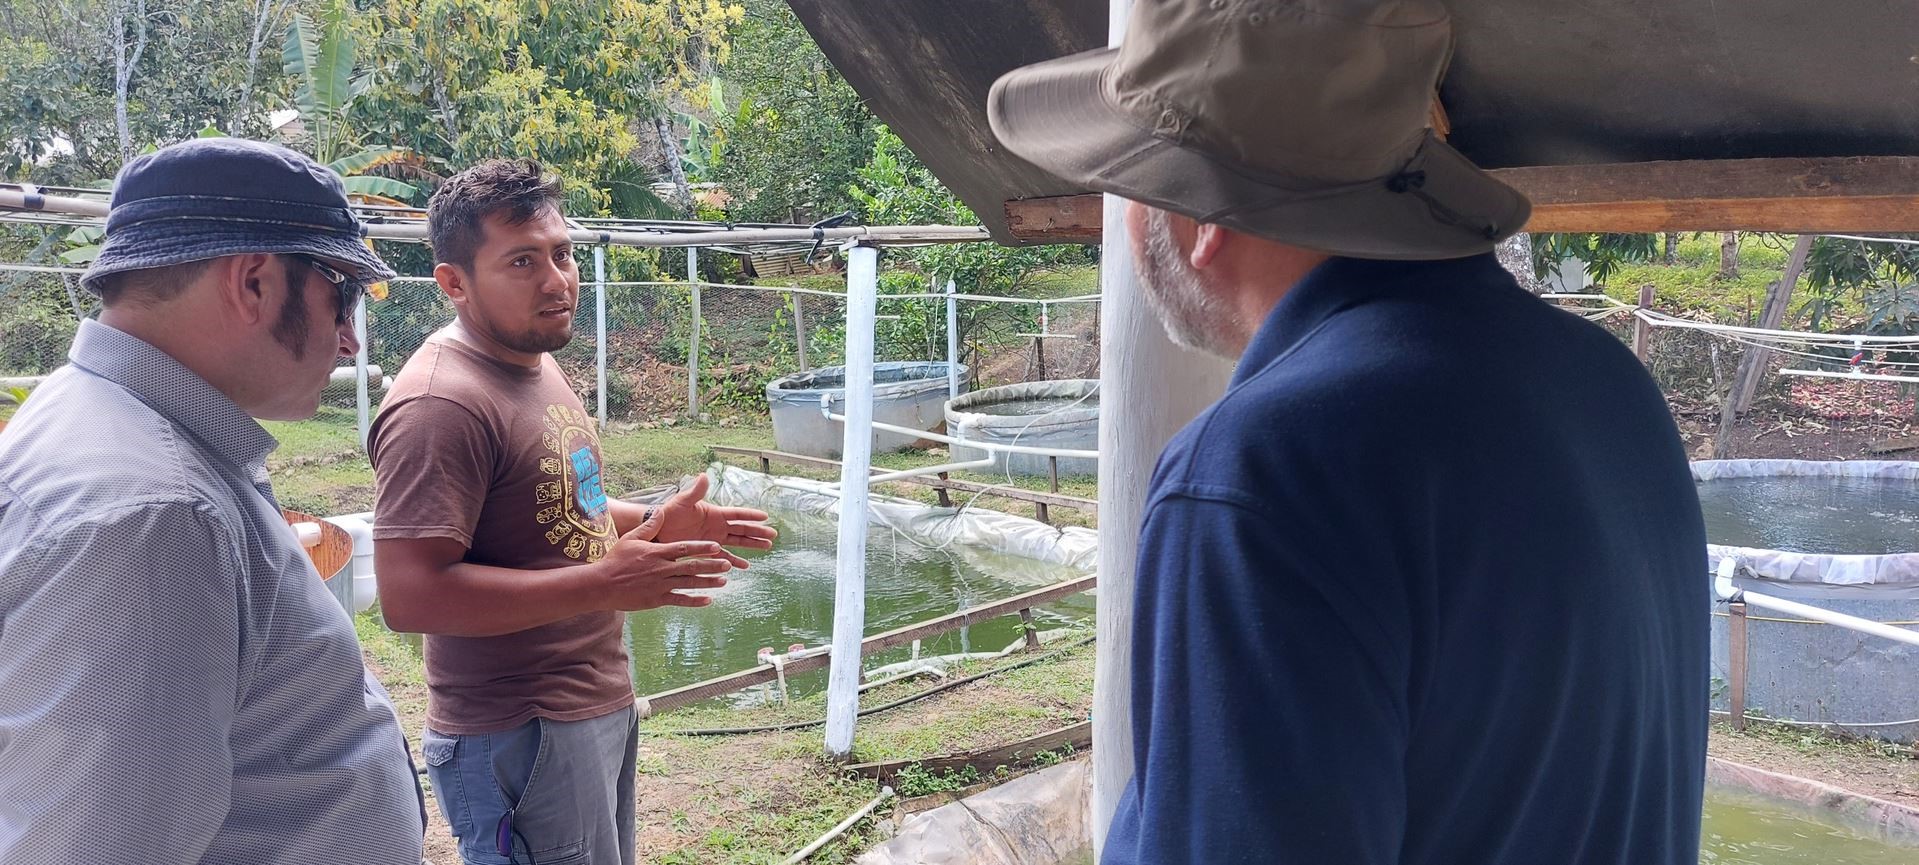 People discussing aquaculture at the hatchery